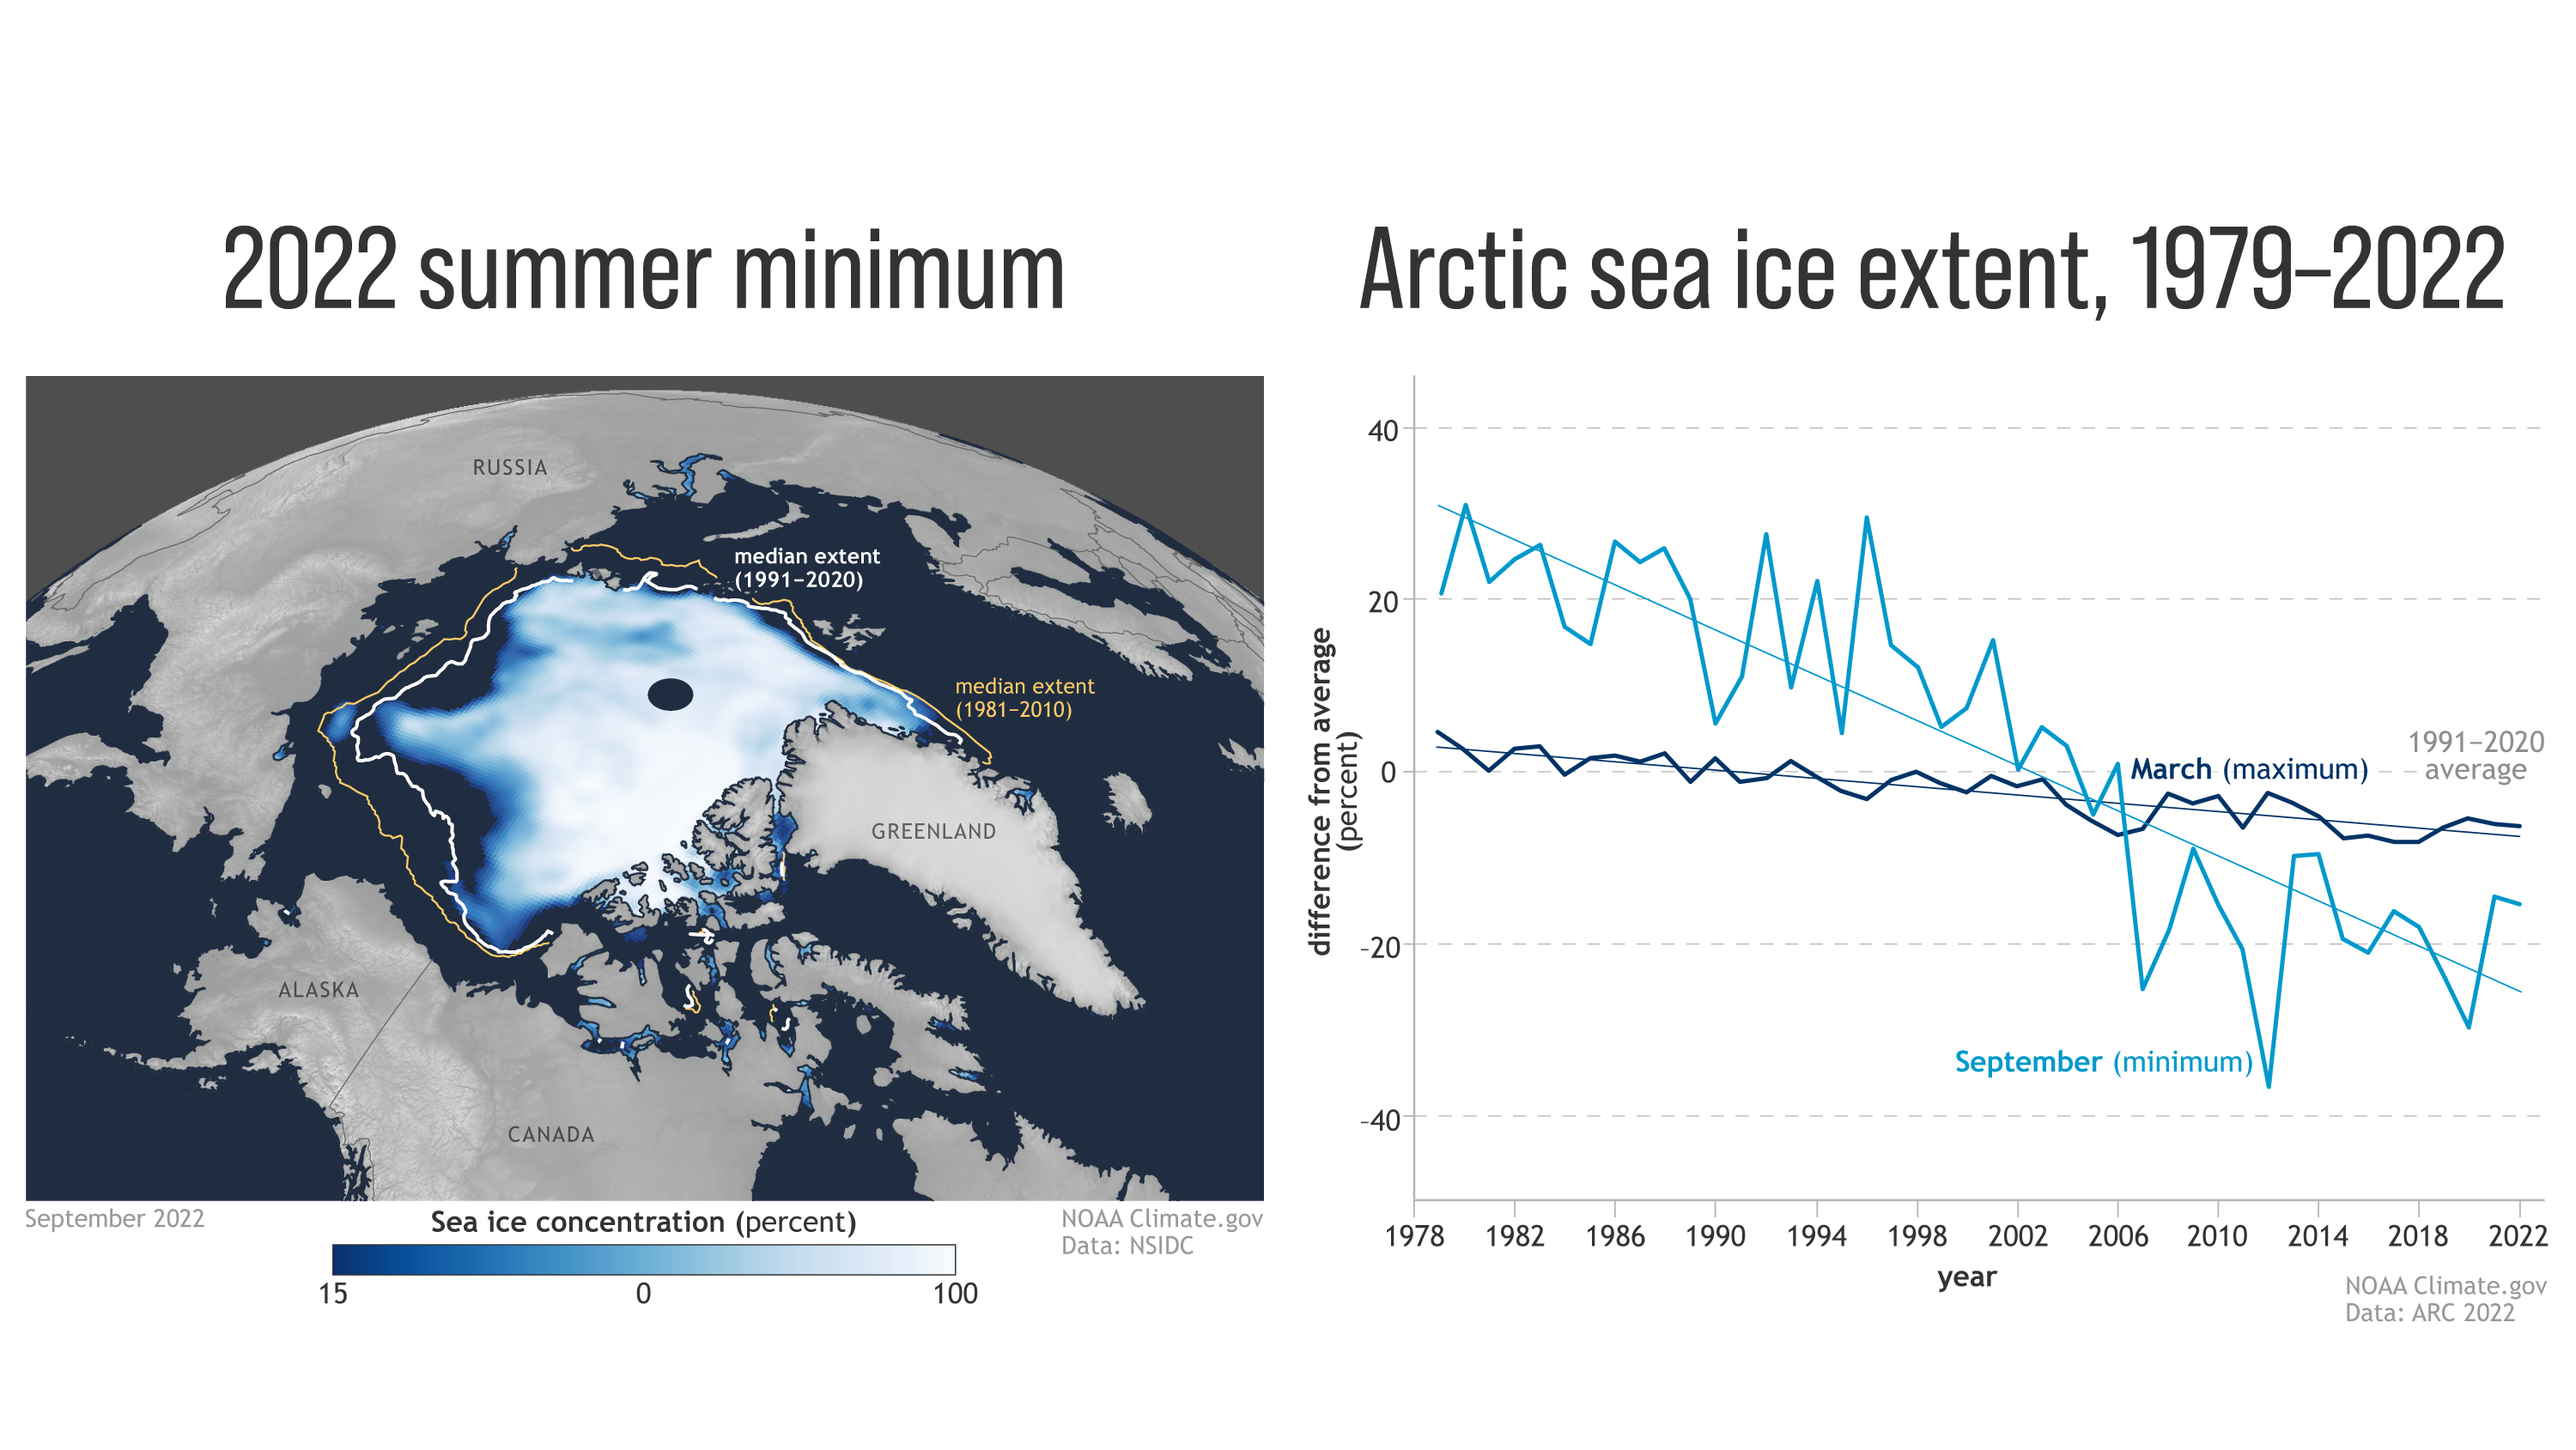 On the left, the graphic shows that Arctic sea ice extent in September 2022 was below the median extent (median means in the middle of the range of observed ice extents) for 1991-2020, and much lower than median ice conditions from 1981-2010. On the right, the graphic shows the steady drop in sea ice extent since 1979. Data: NSIDC. Graphic: NOAA / Climate.gov